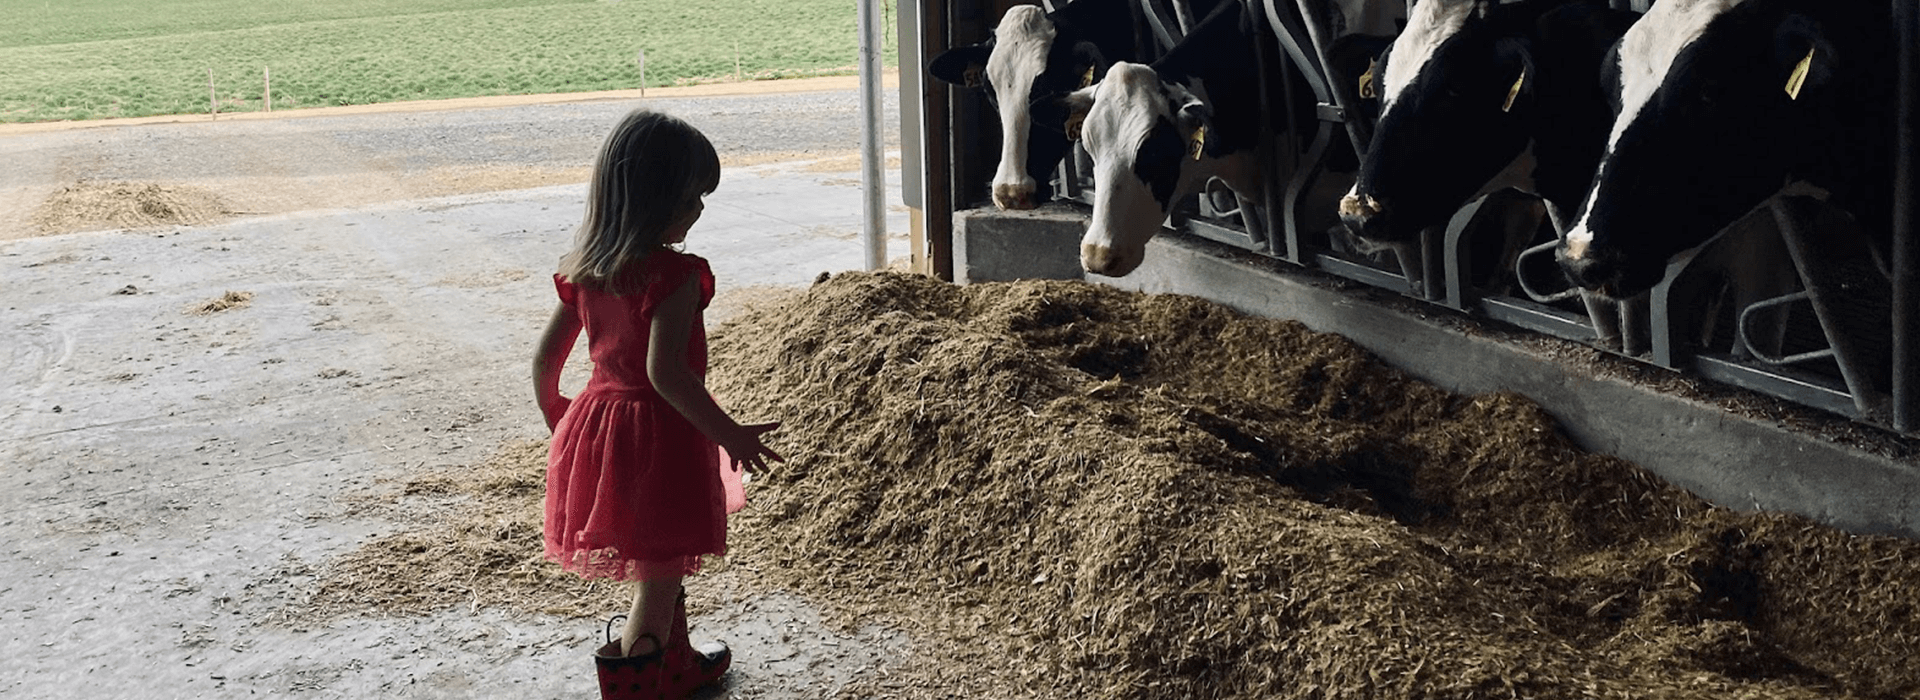 Little girl watching cows in cow-pen